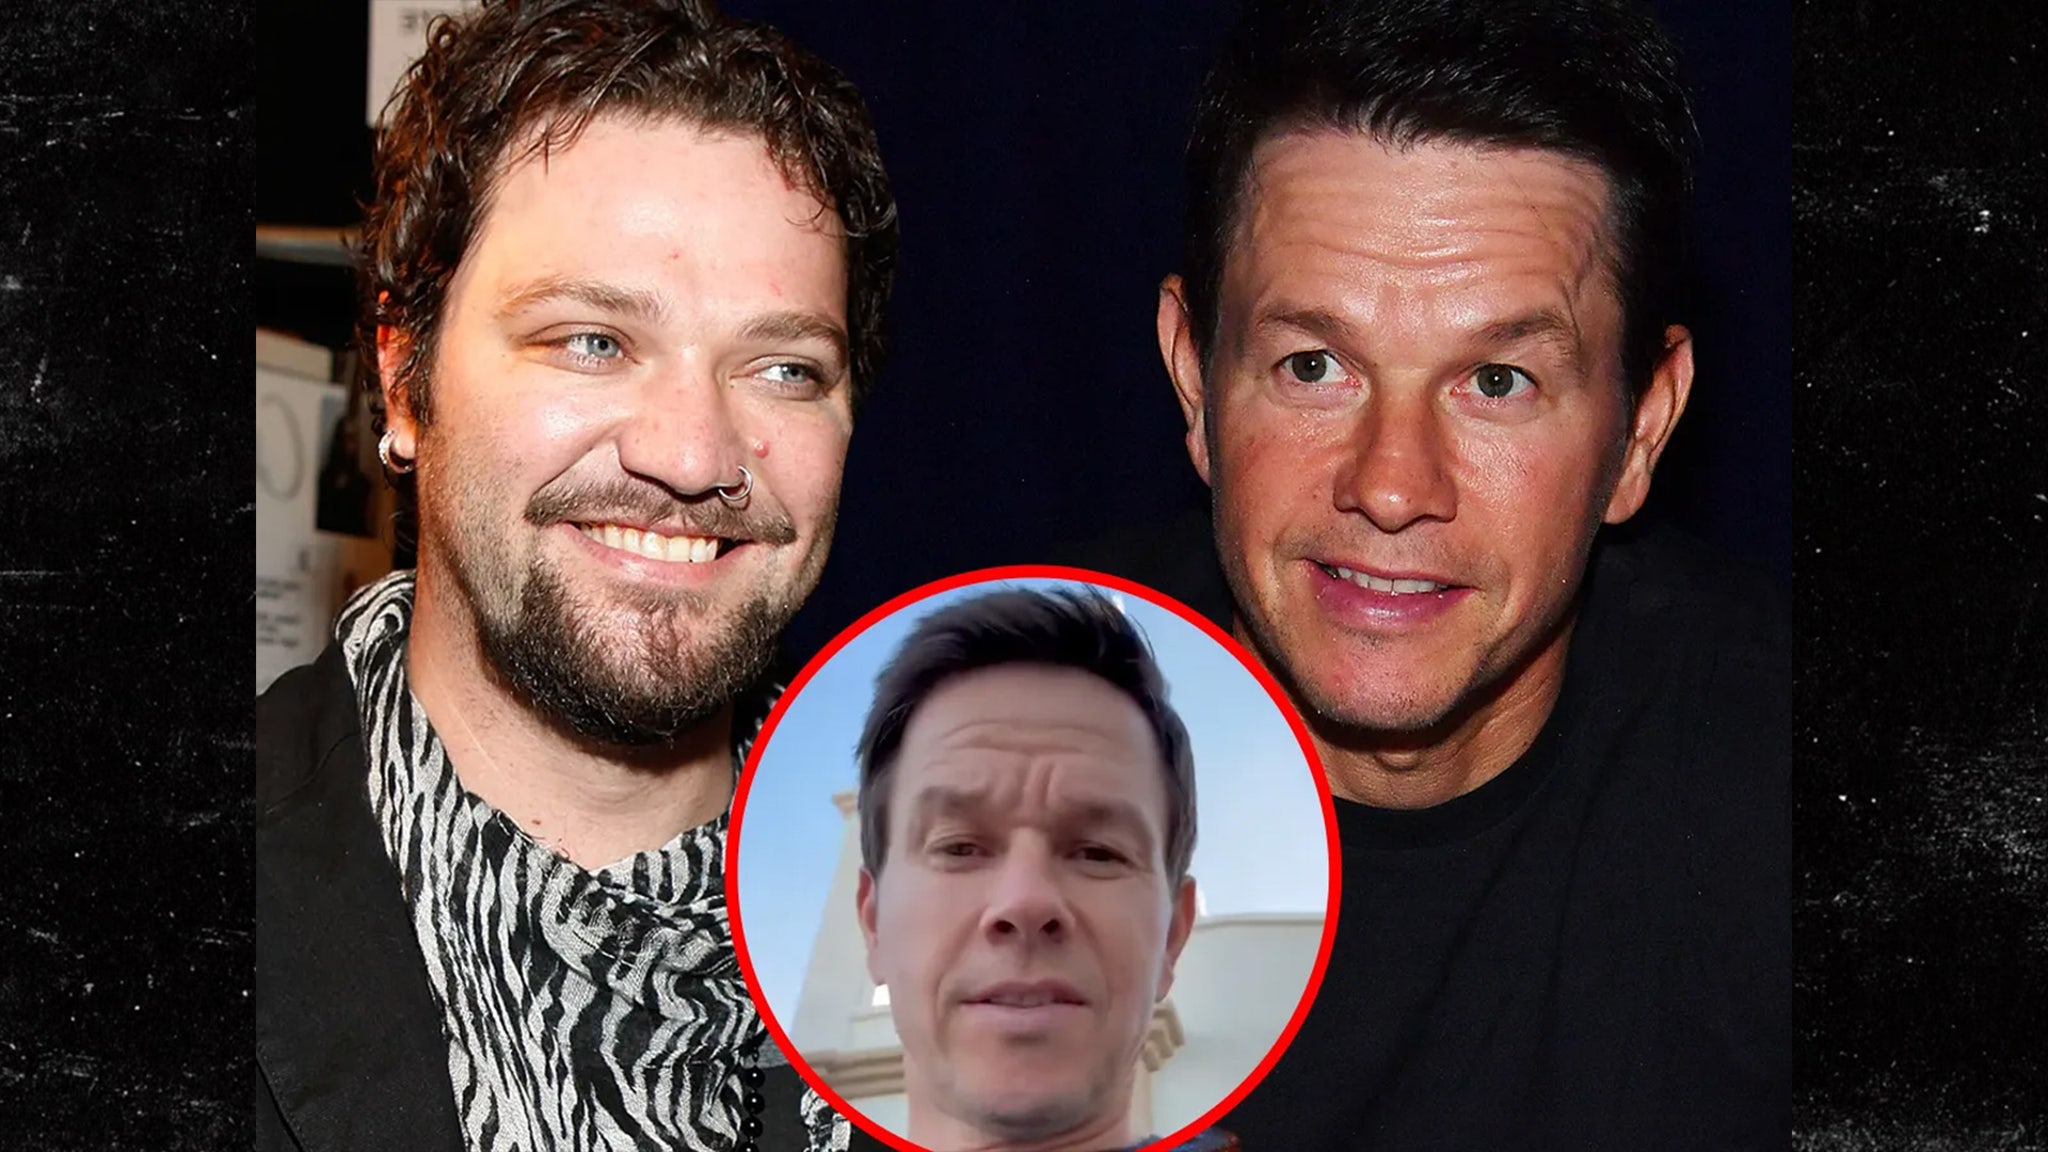 Bam Margera Celebrates Over 100 Days of Sobriety and Receives Support from Mark Wahlberg